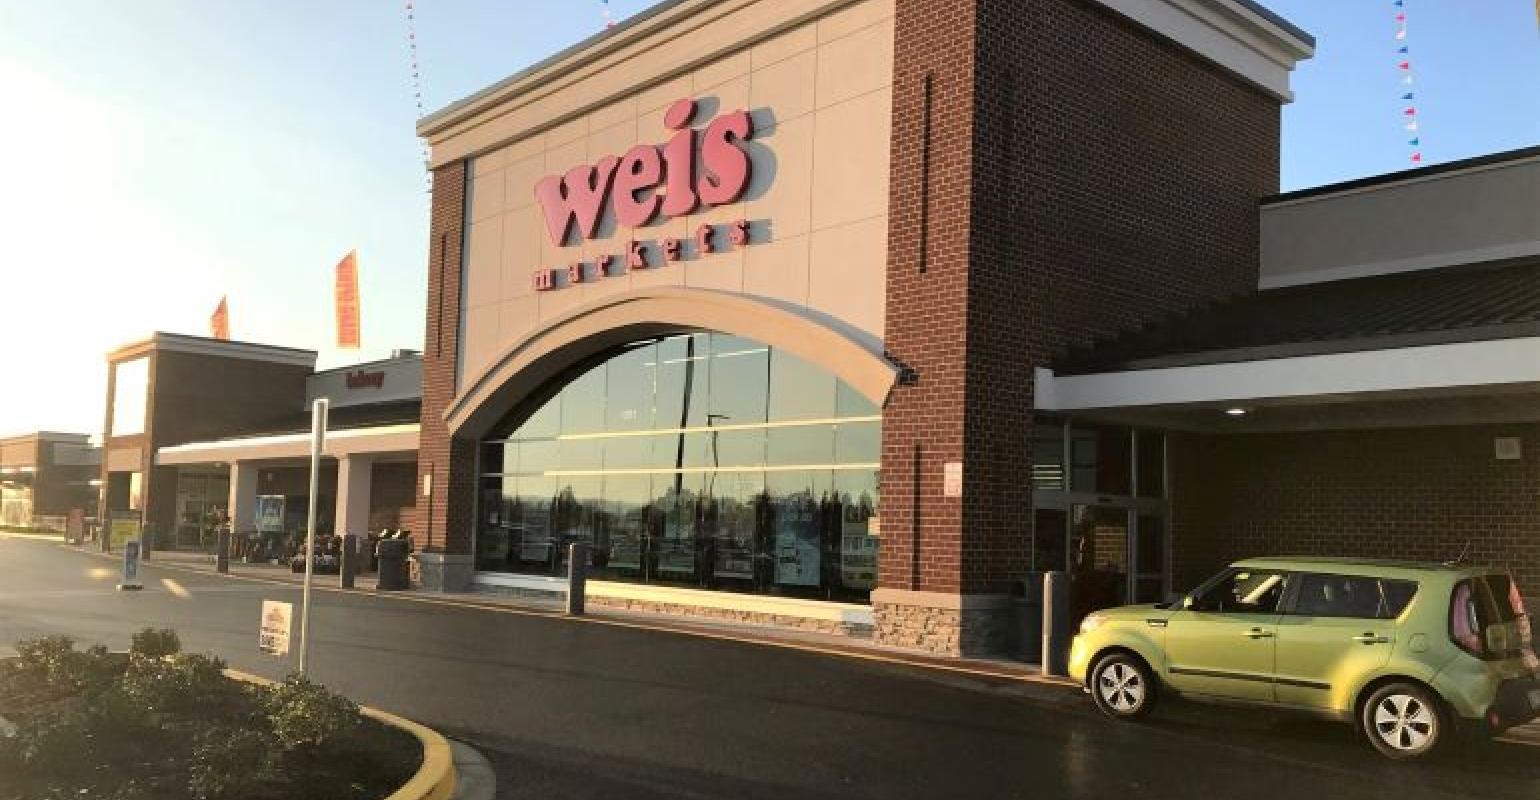 Weis Markets: 100 Years of Innovation